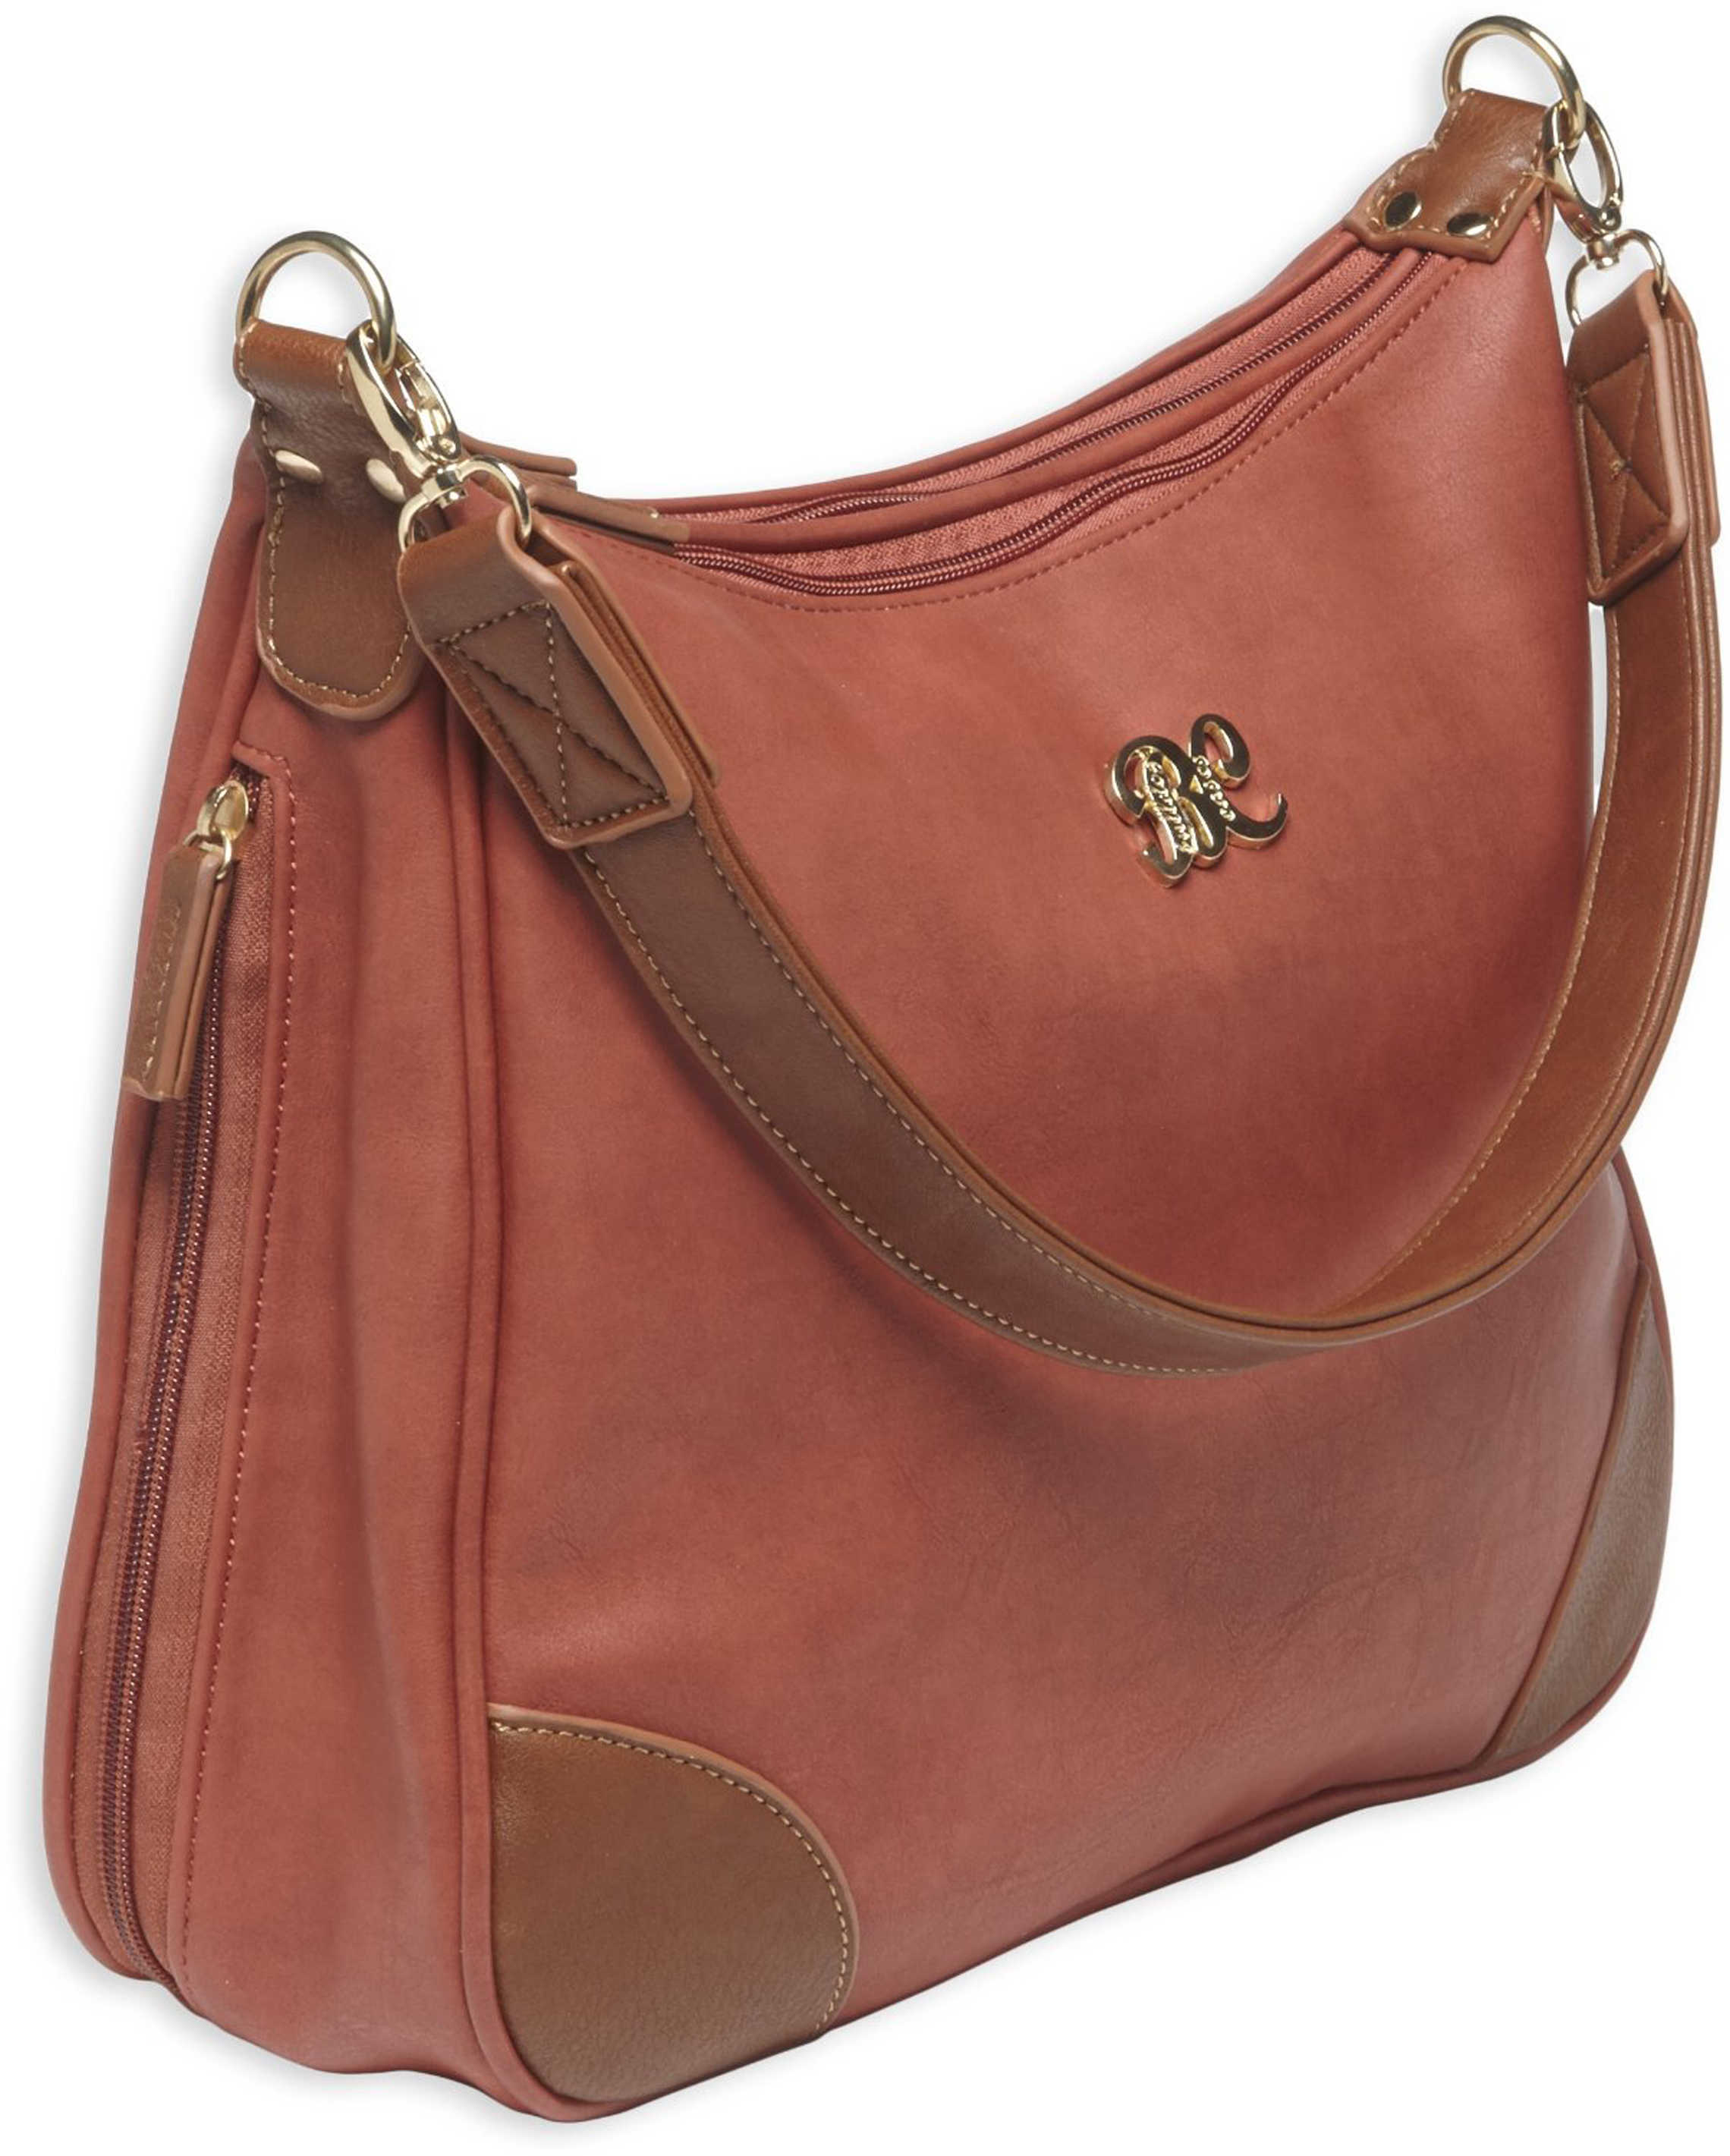 Bulldog Cases Hobo Style Purse w/Holster Brick Red/Tan Md: BDP-016